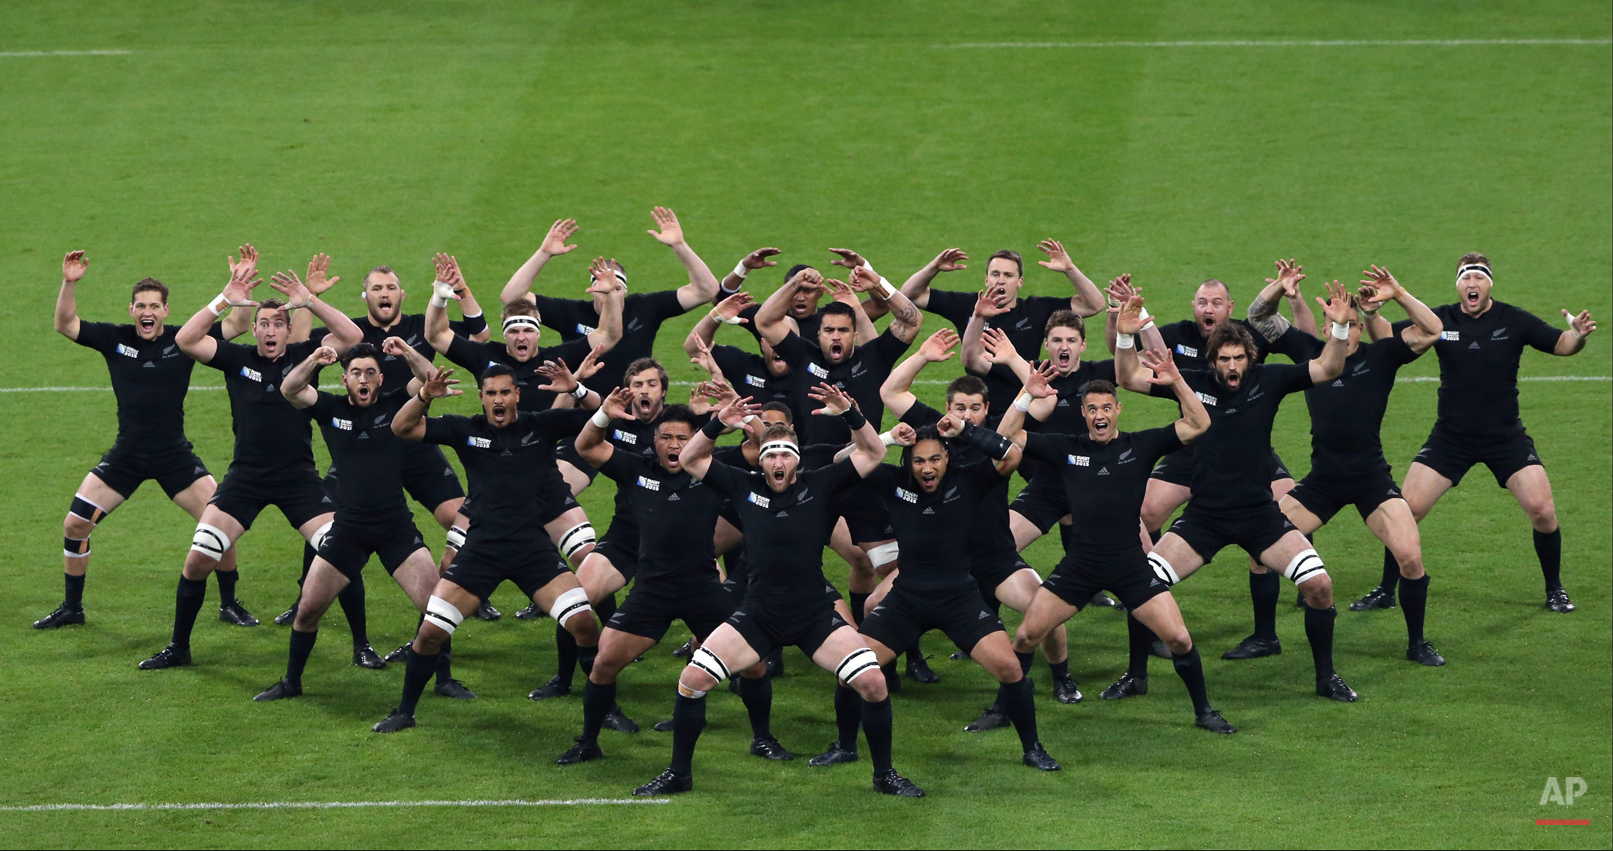  In this Oct. 9, 2015 photo, New Zealand players perform the haka before their Rugby World Cup Pool C match between New Zealand and Tonga at St James' Park, Newcastle, England.  (AP Photo/Scott Heppell) 